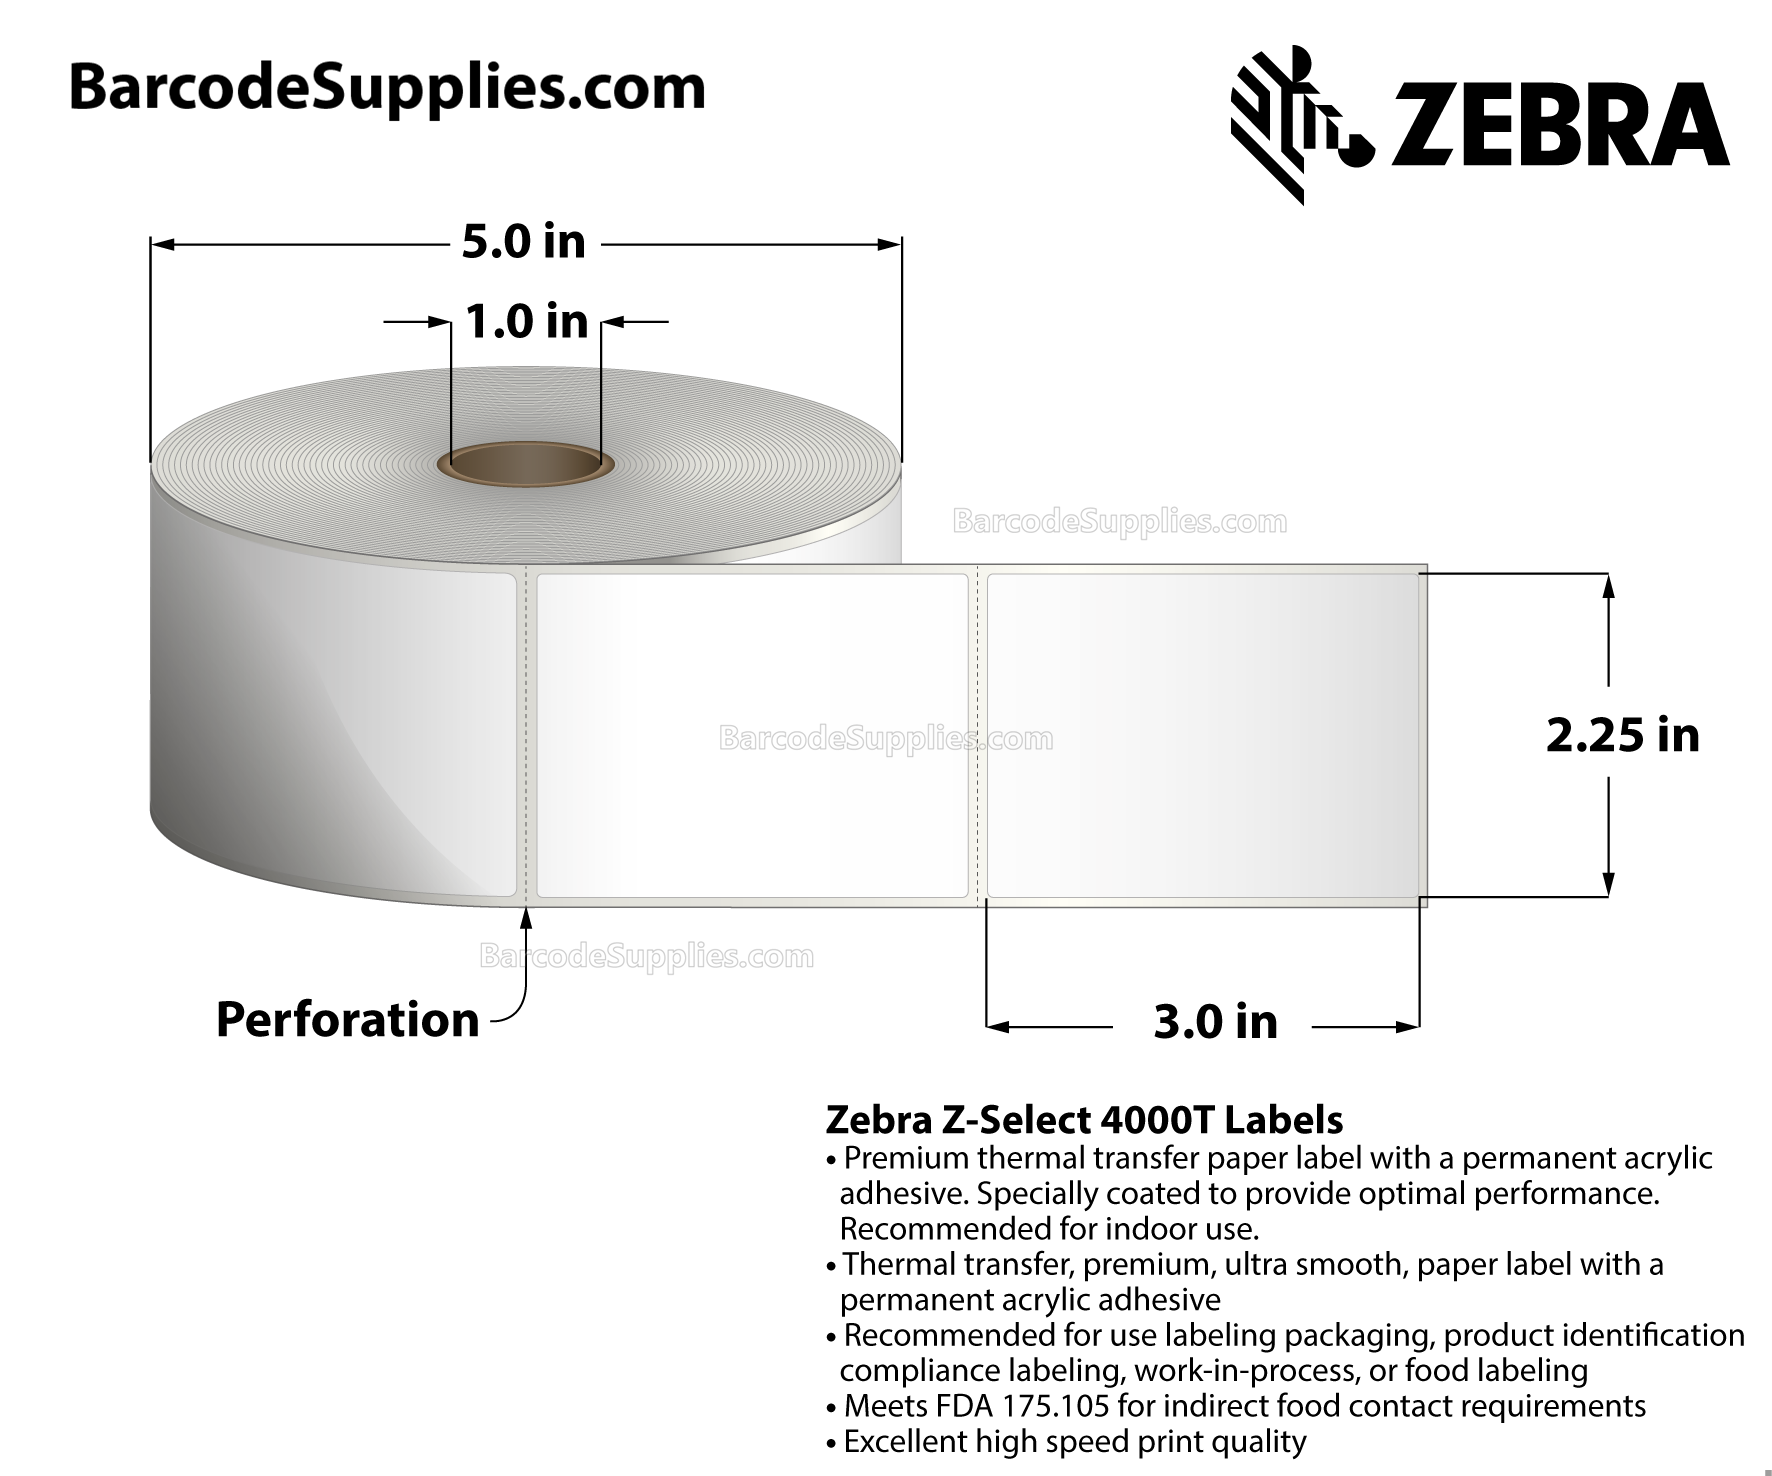 2.25 x 3 Thermal Transfer White Z-Select 4000T Labels With Permanent Adhesive - Perforated - 930 Labels Per Roll - Carton Of 6 Rolls - 5580 Labels Total - MPN: 10009526